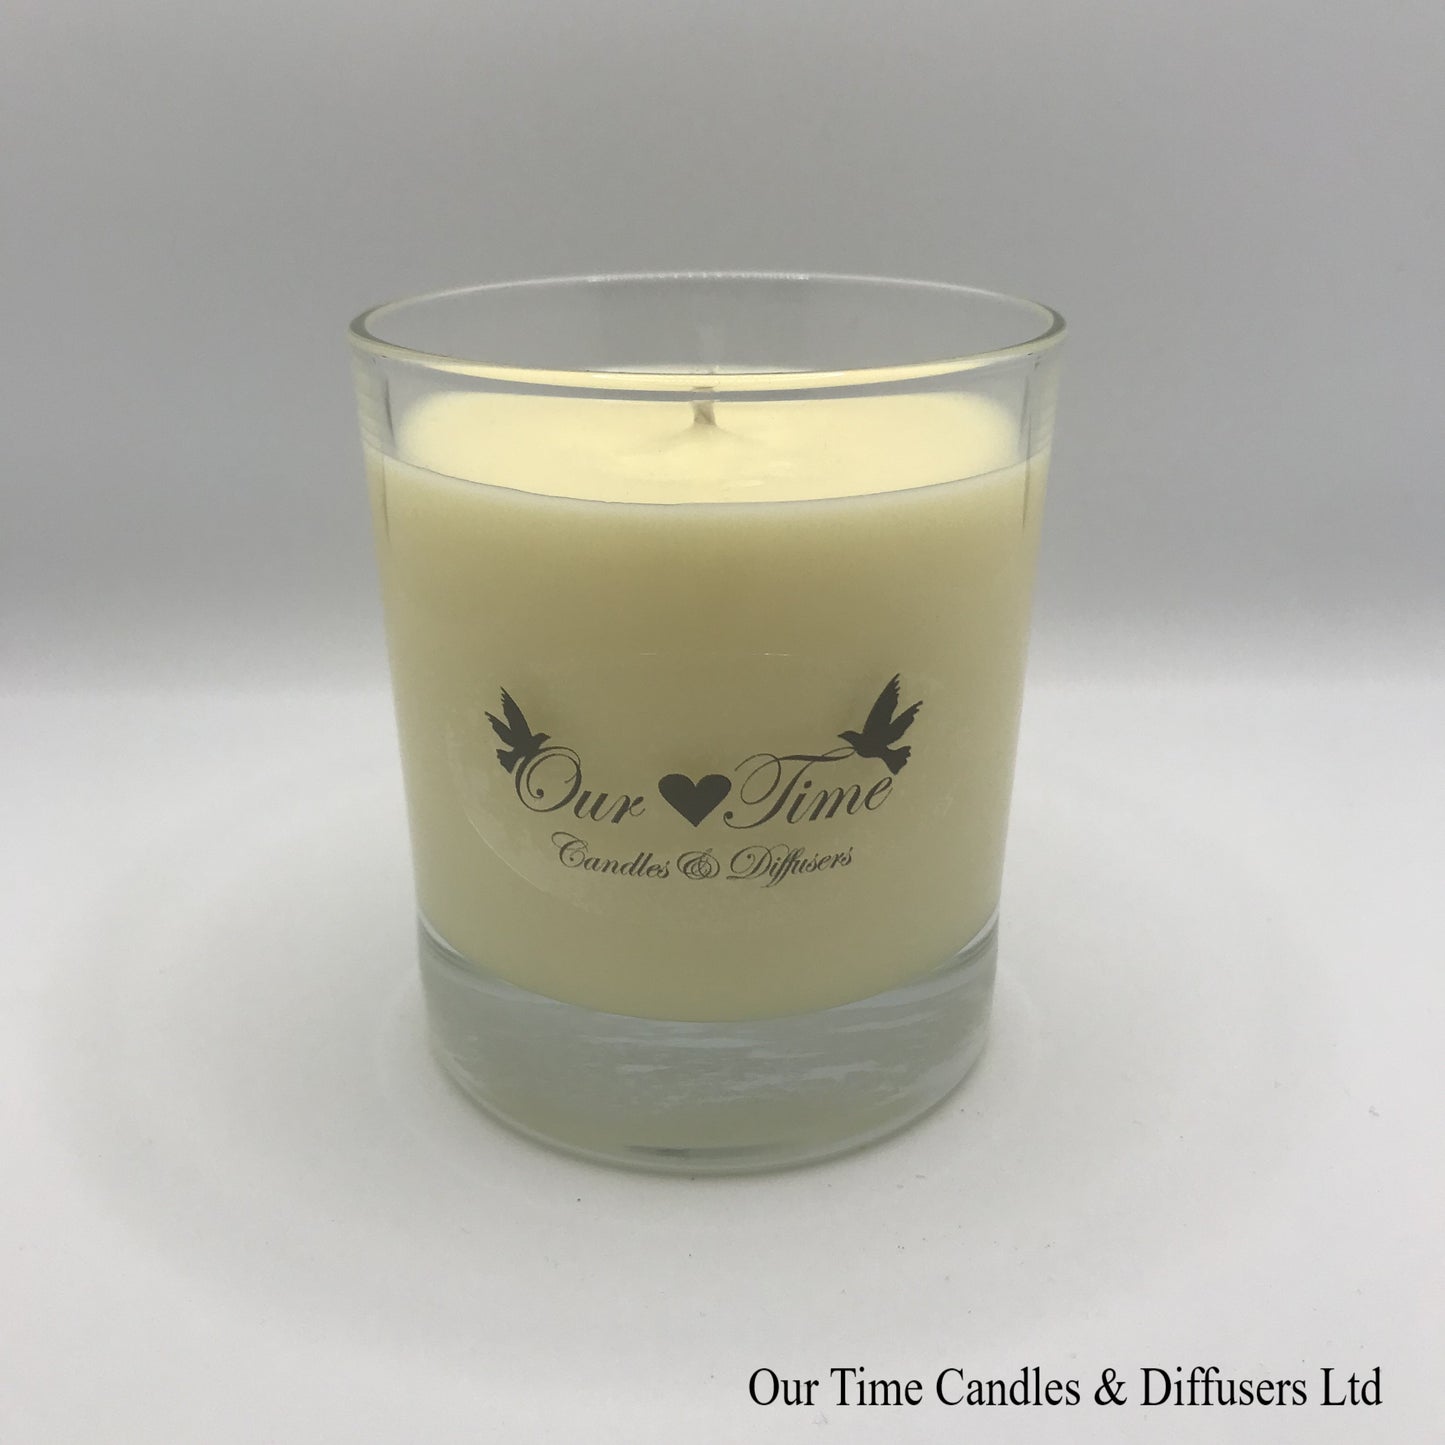 Refreshing scented wax filled candle